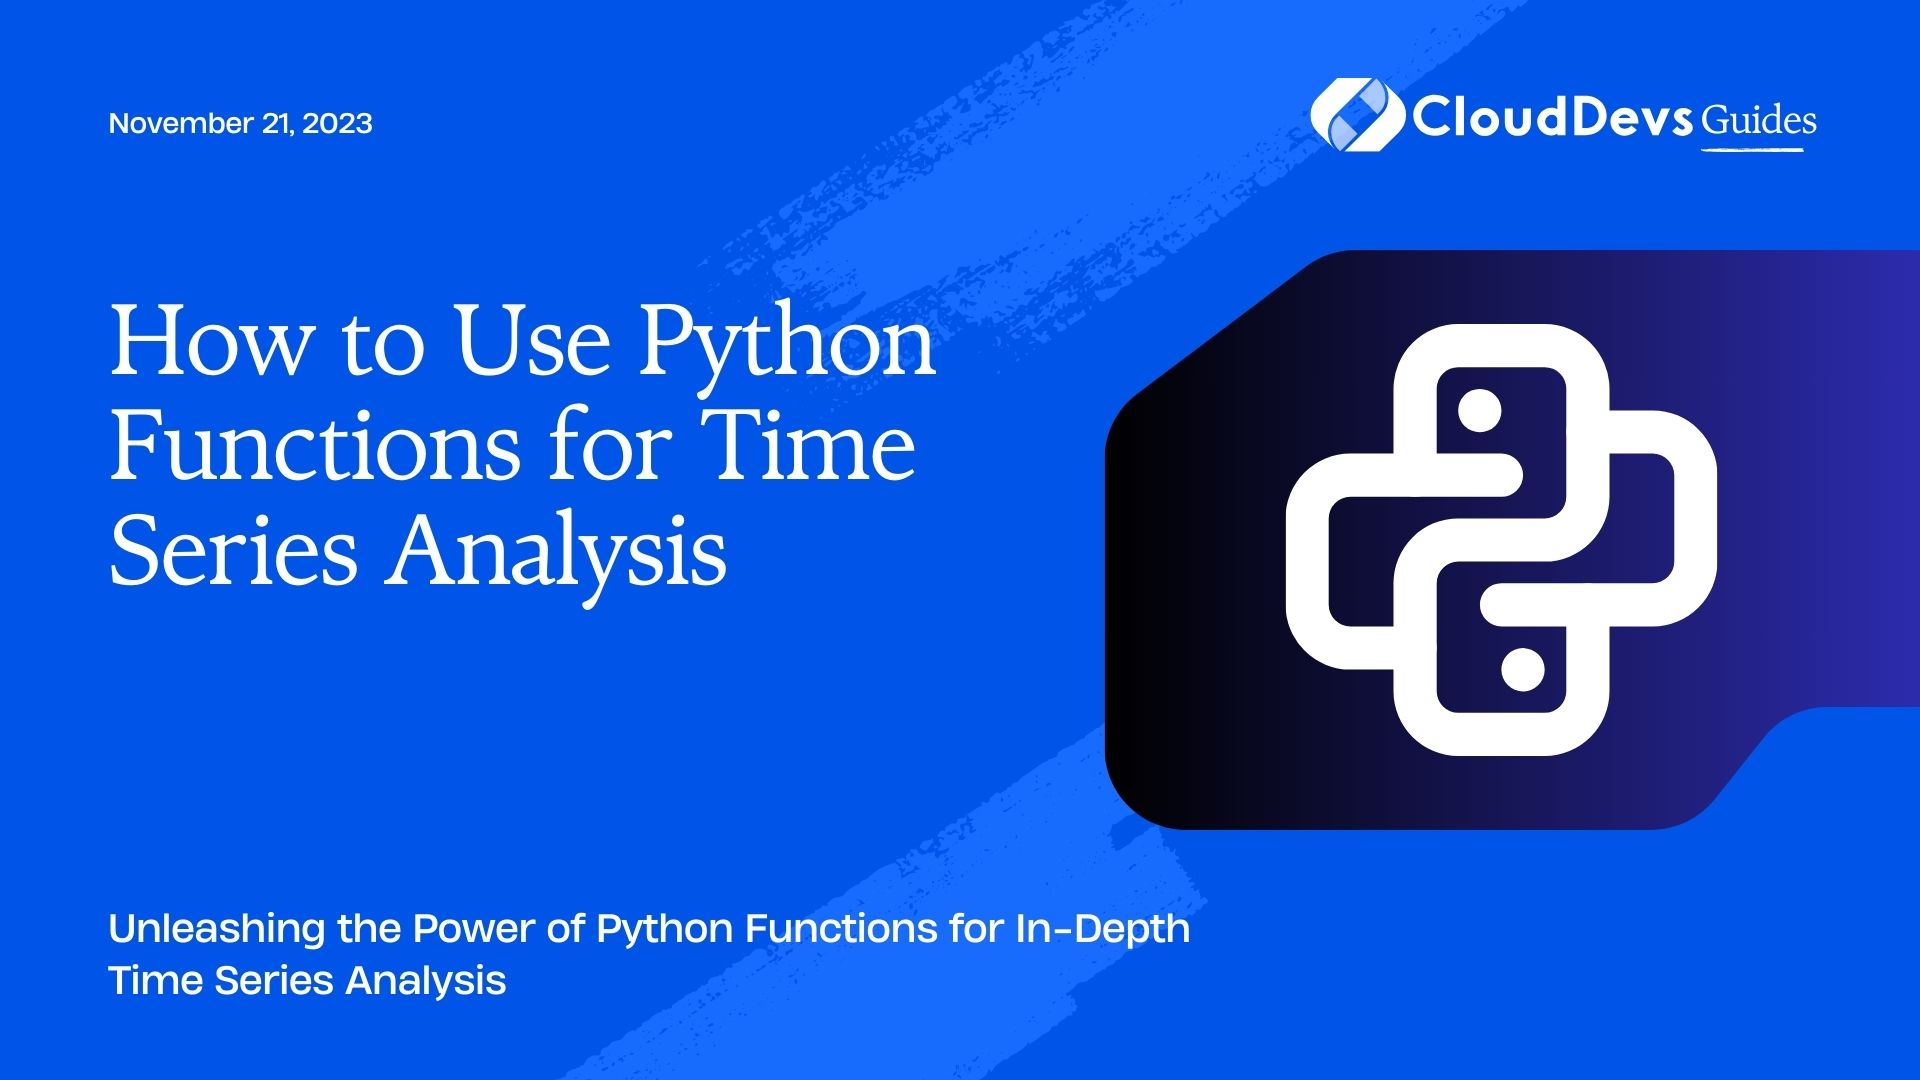 How to Use Python Functions for Time Series Analysis